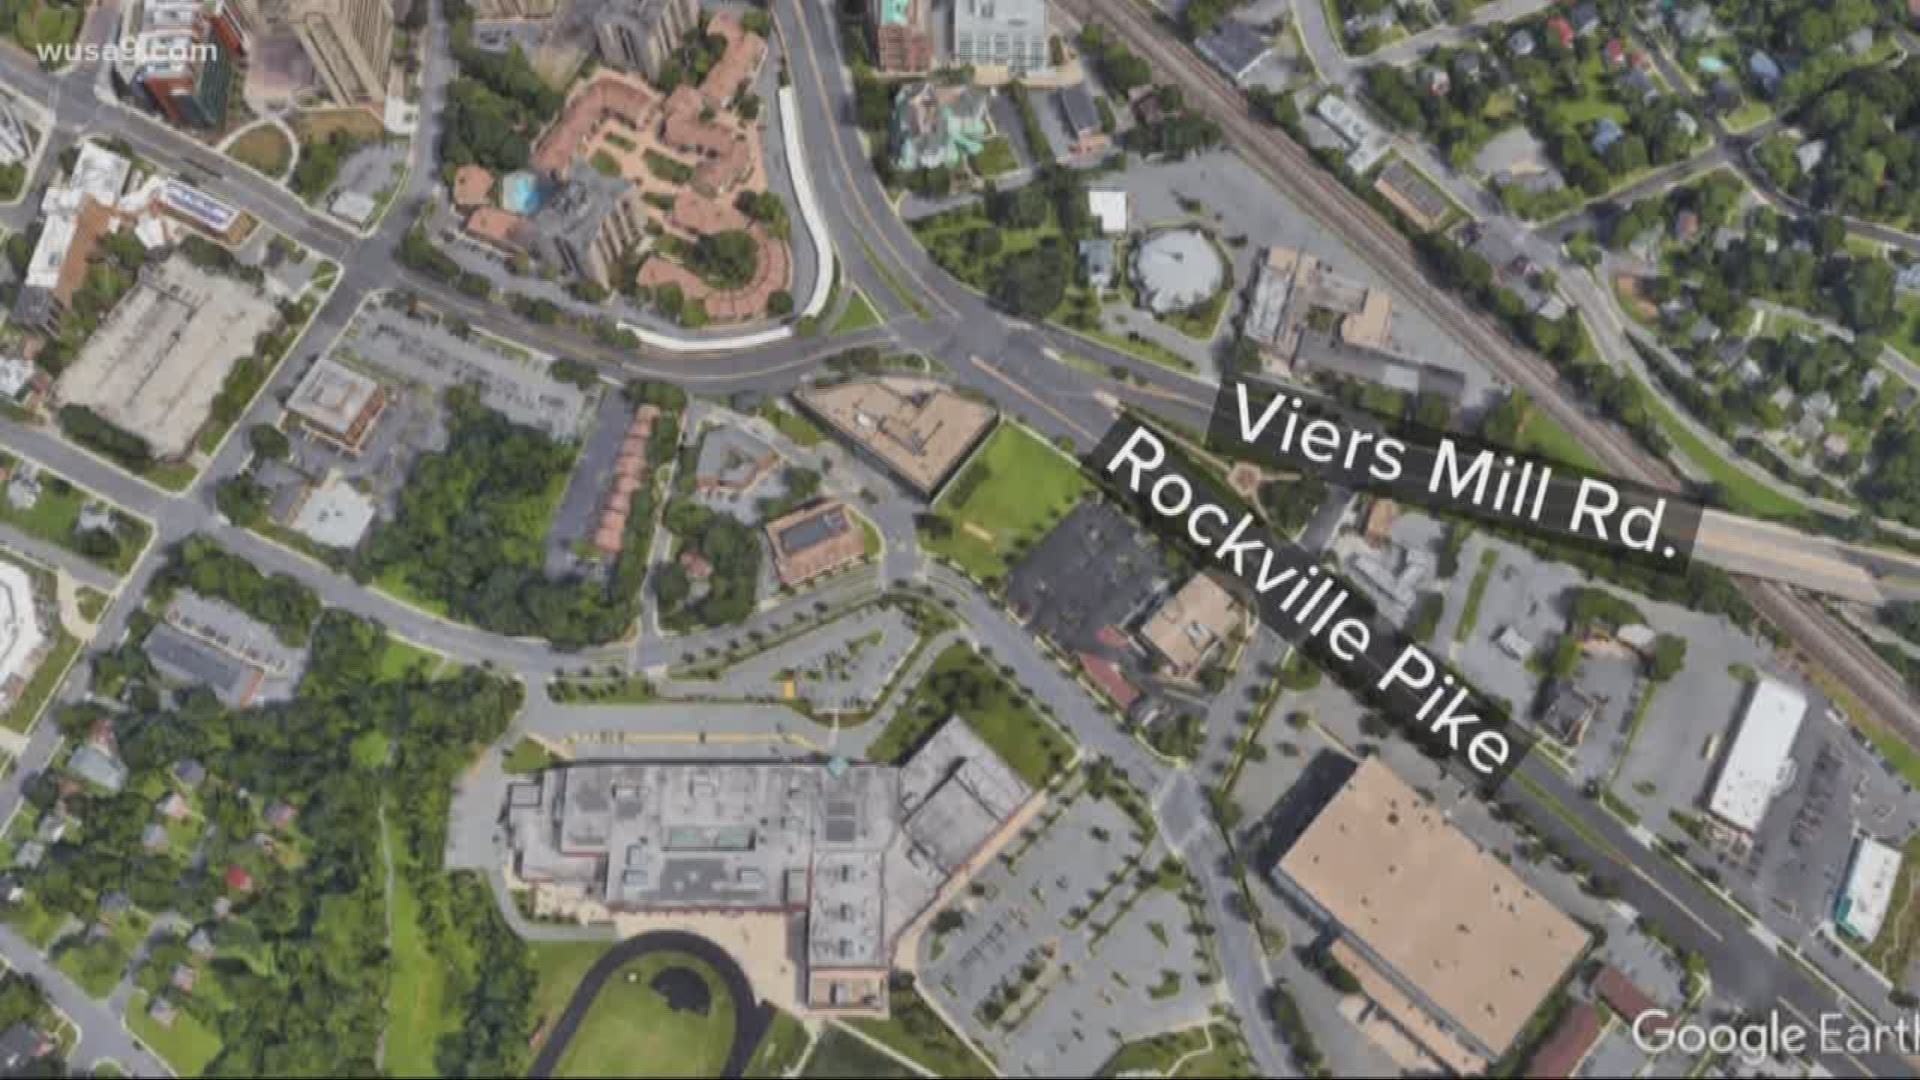 The area where Rockville Pike meets Viers Mill Road is considered one of the most dangerous intersections in Montgomery County.